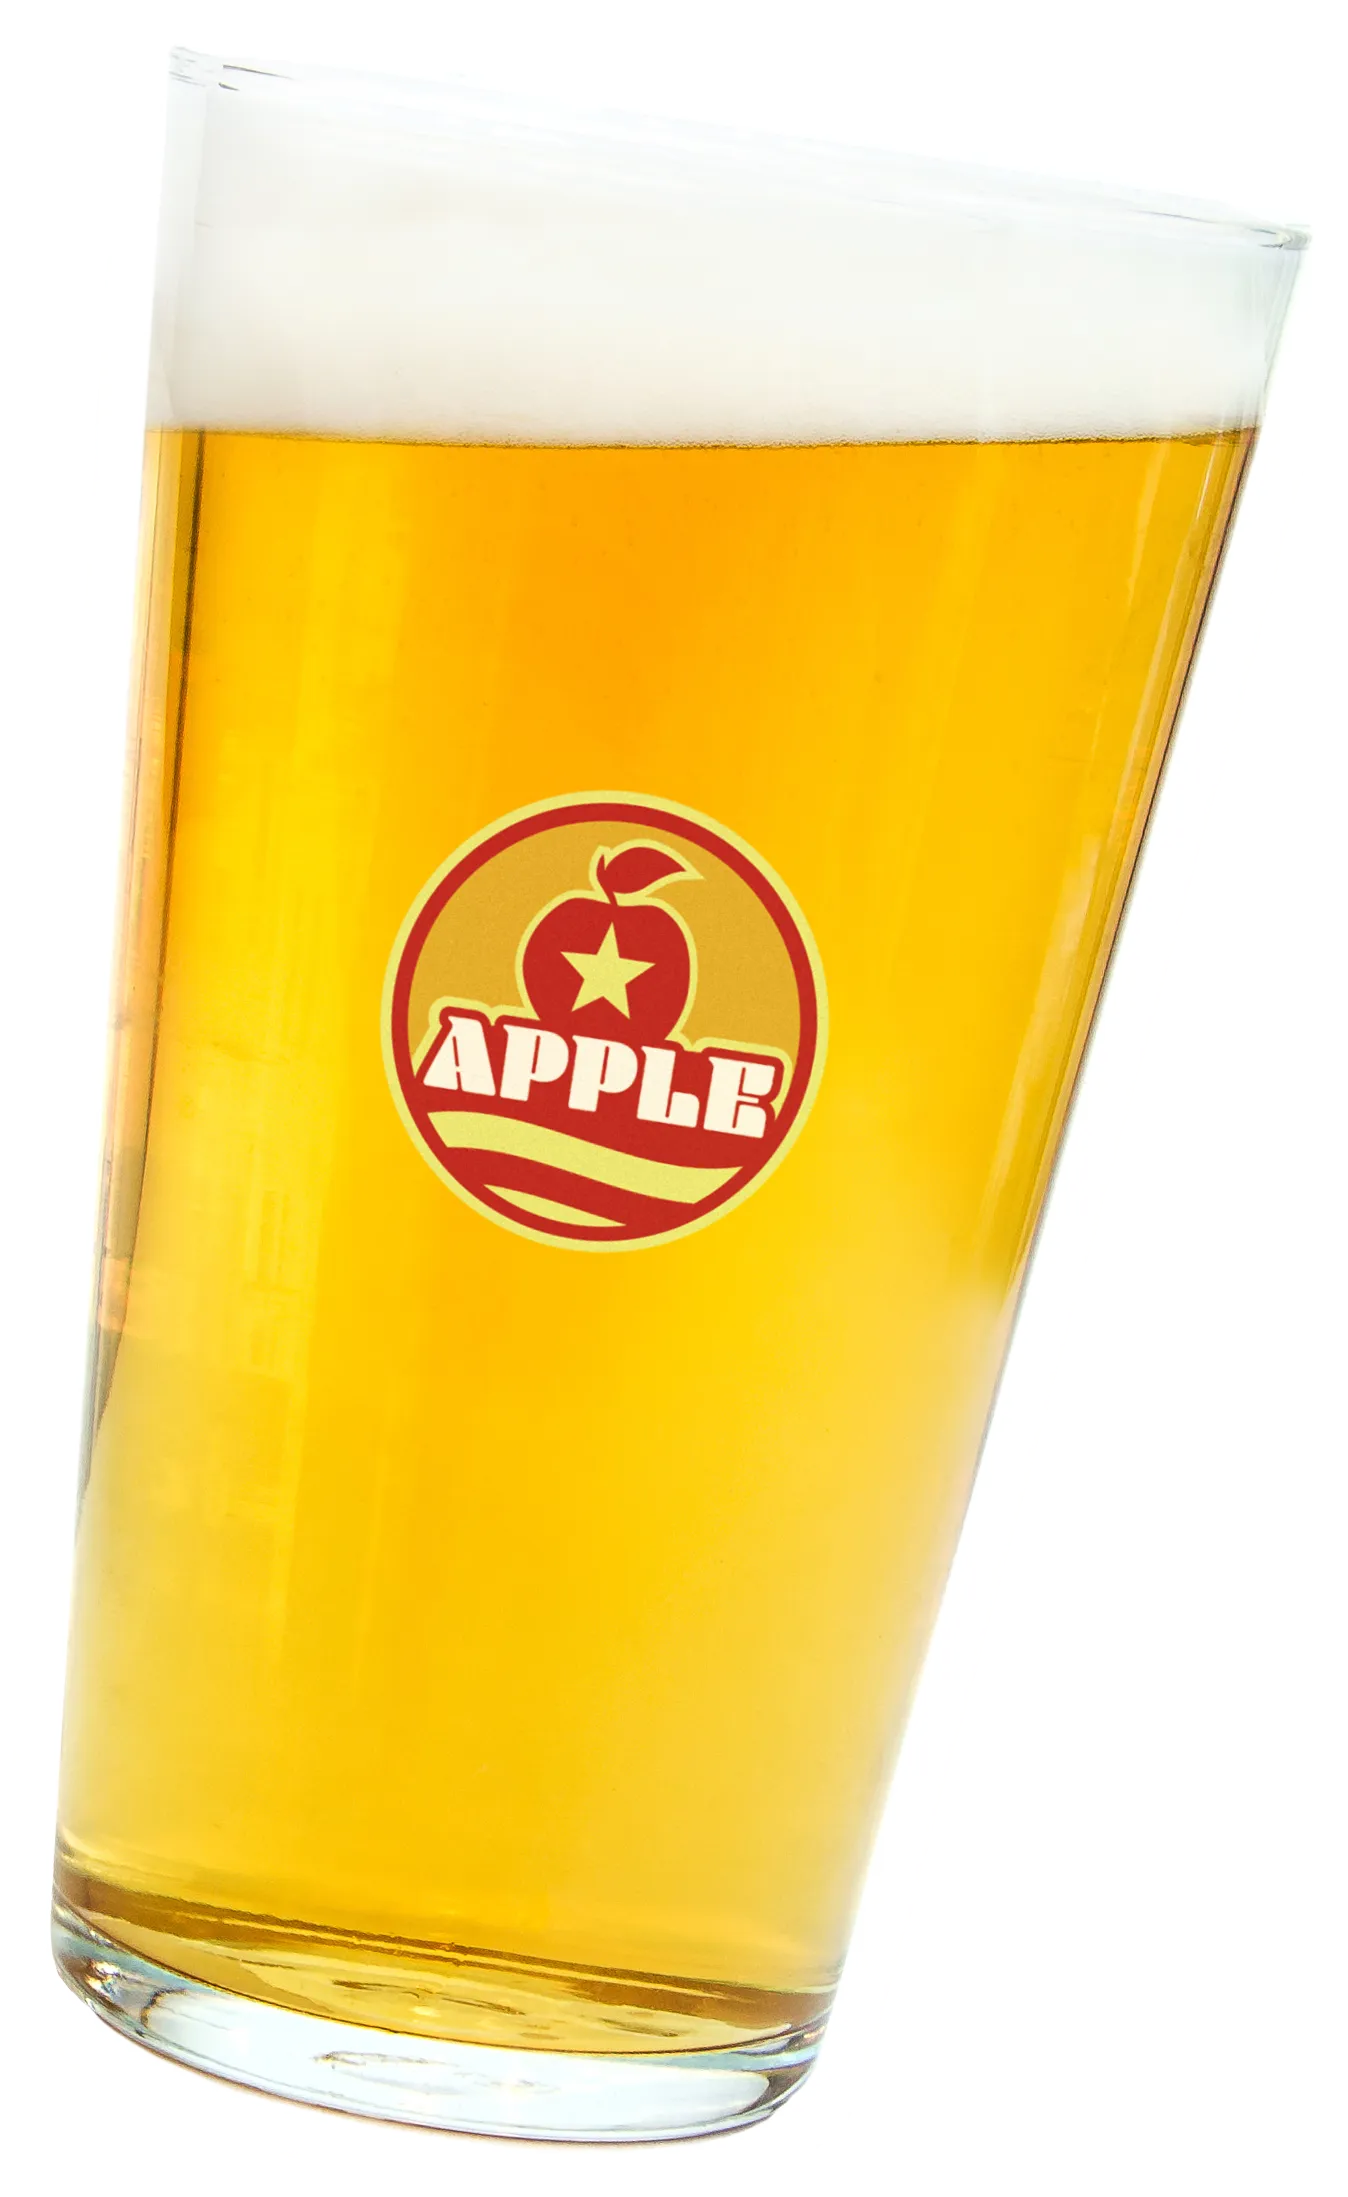 A tilted pint of beer with a "Apple" logo.